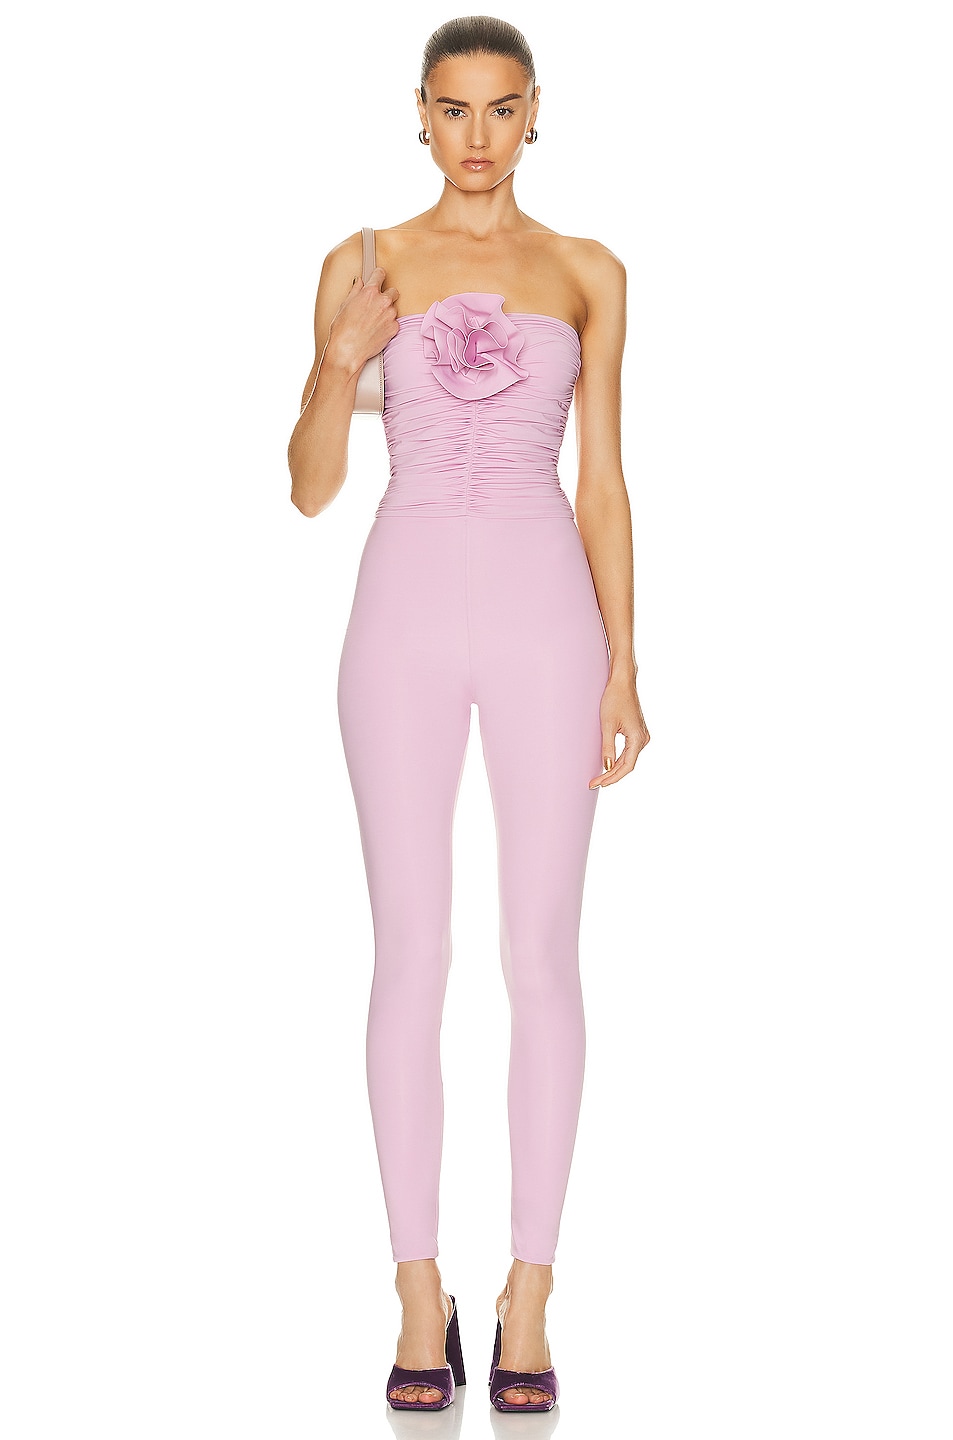 Image 1 of Maygel Coronel for FWRD Matuna Jumpsuit in Ballet Rose